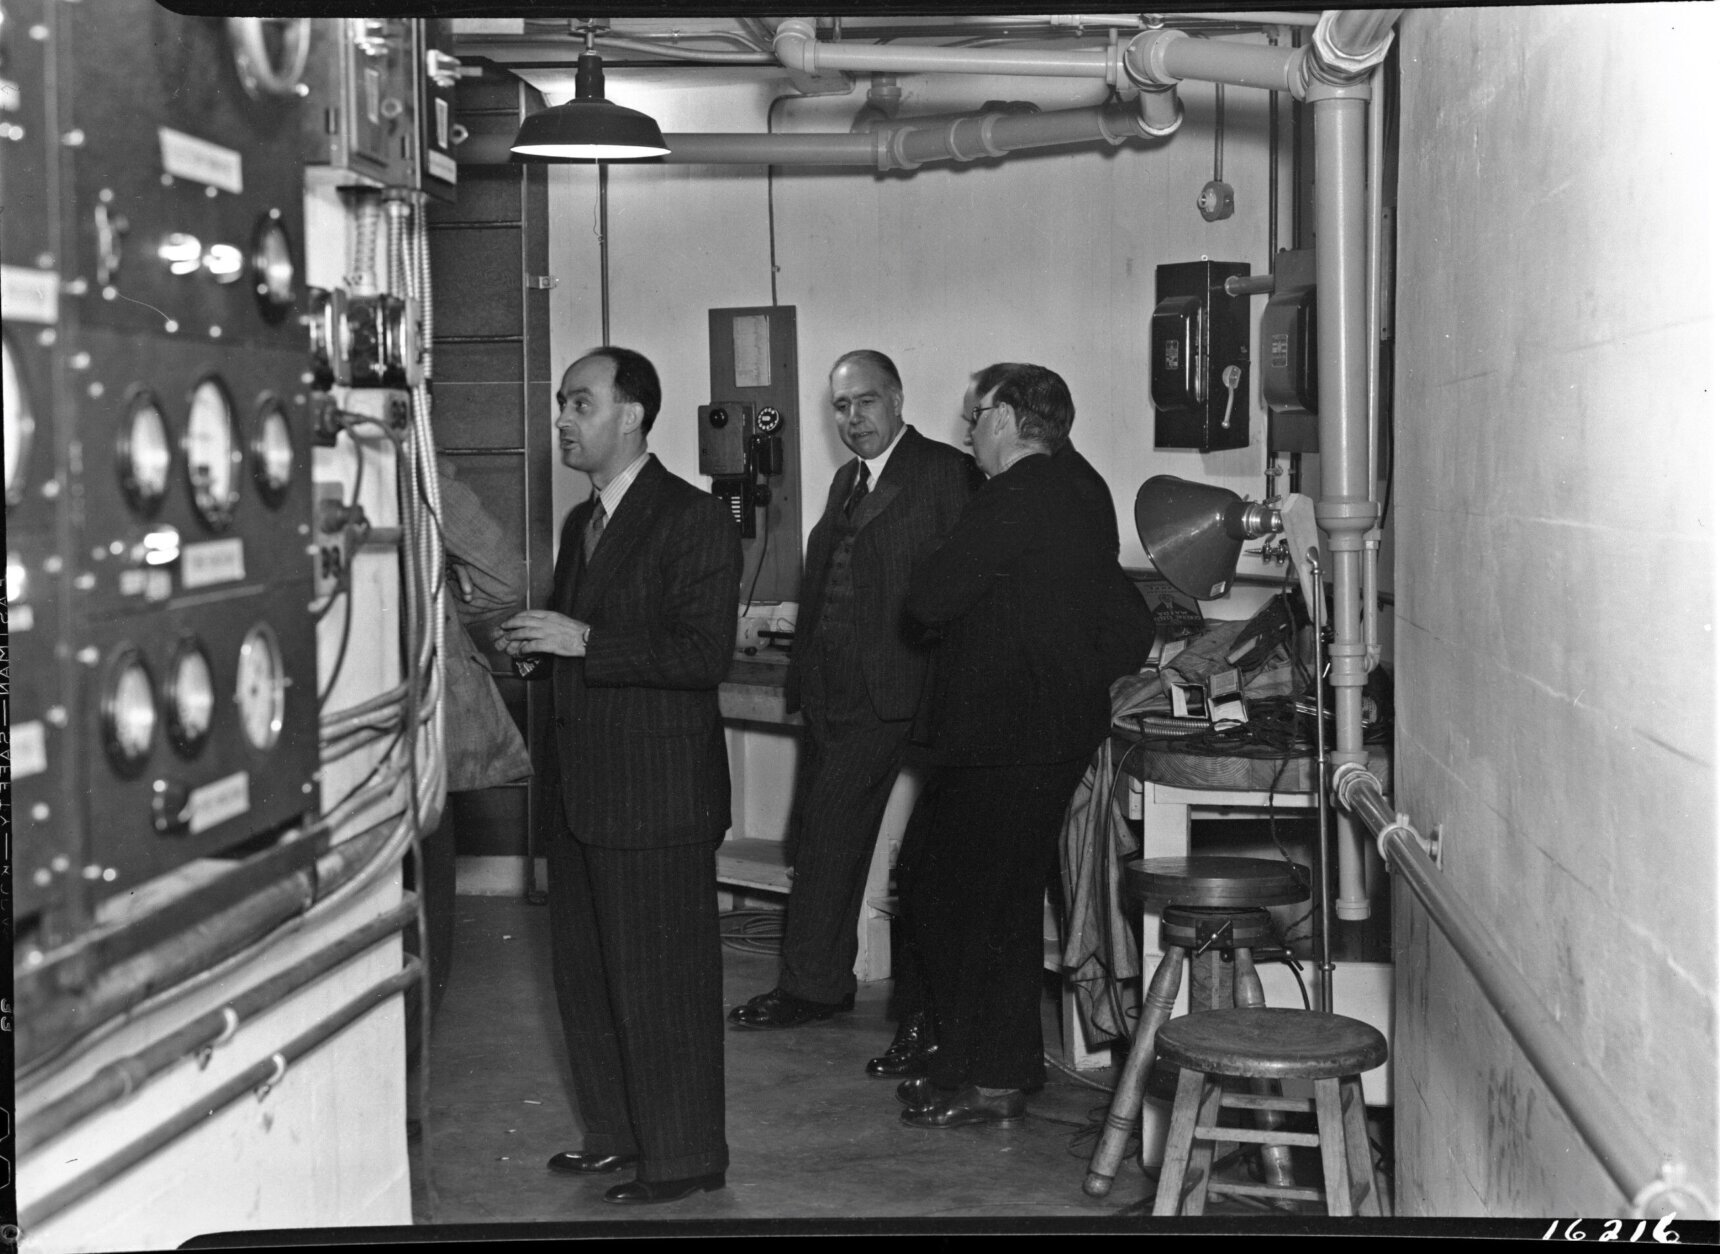 Fermi, Bohr, and Rosenfeld in the basement of the Atomic Physics Observatory, January 28, 1939. (Courtesy of the Carnegie Institute of Science)